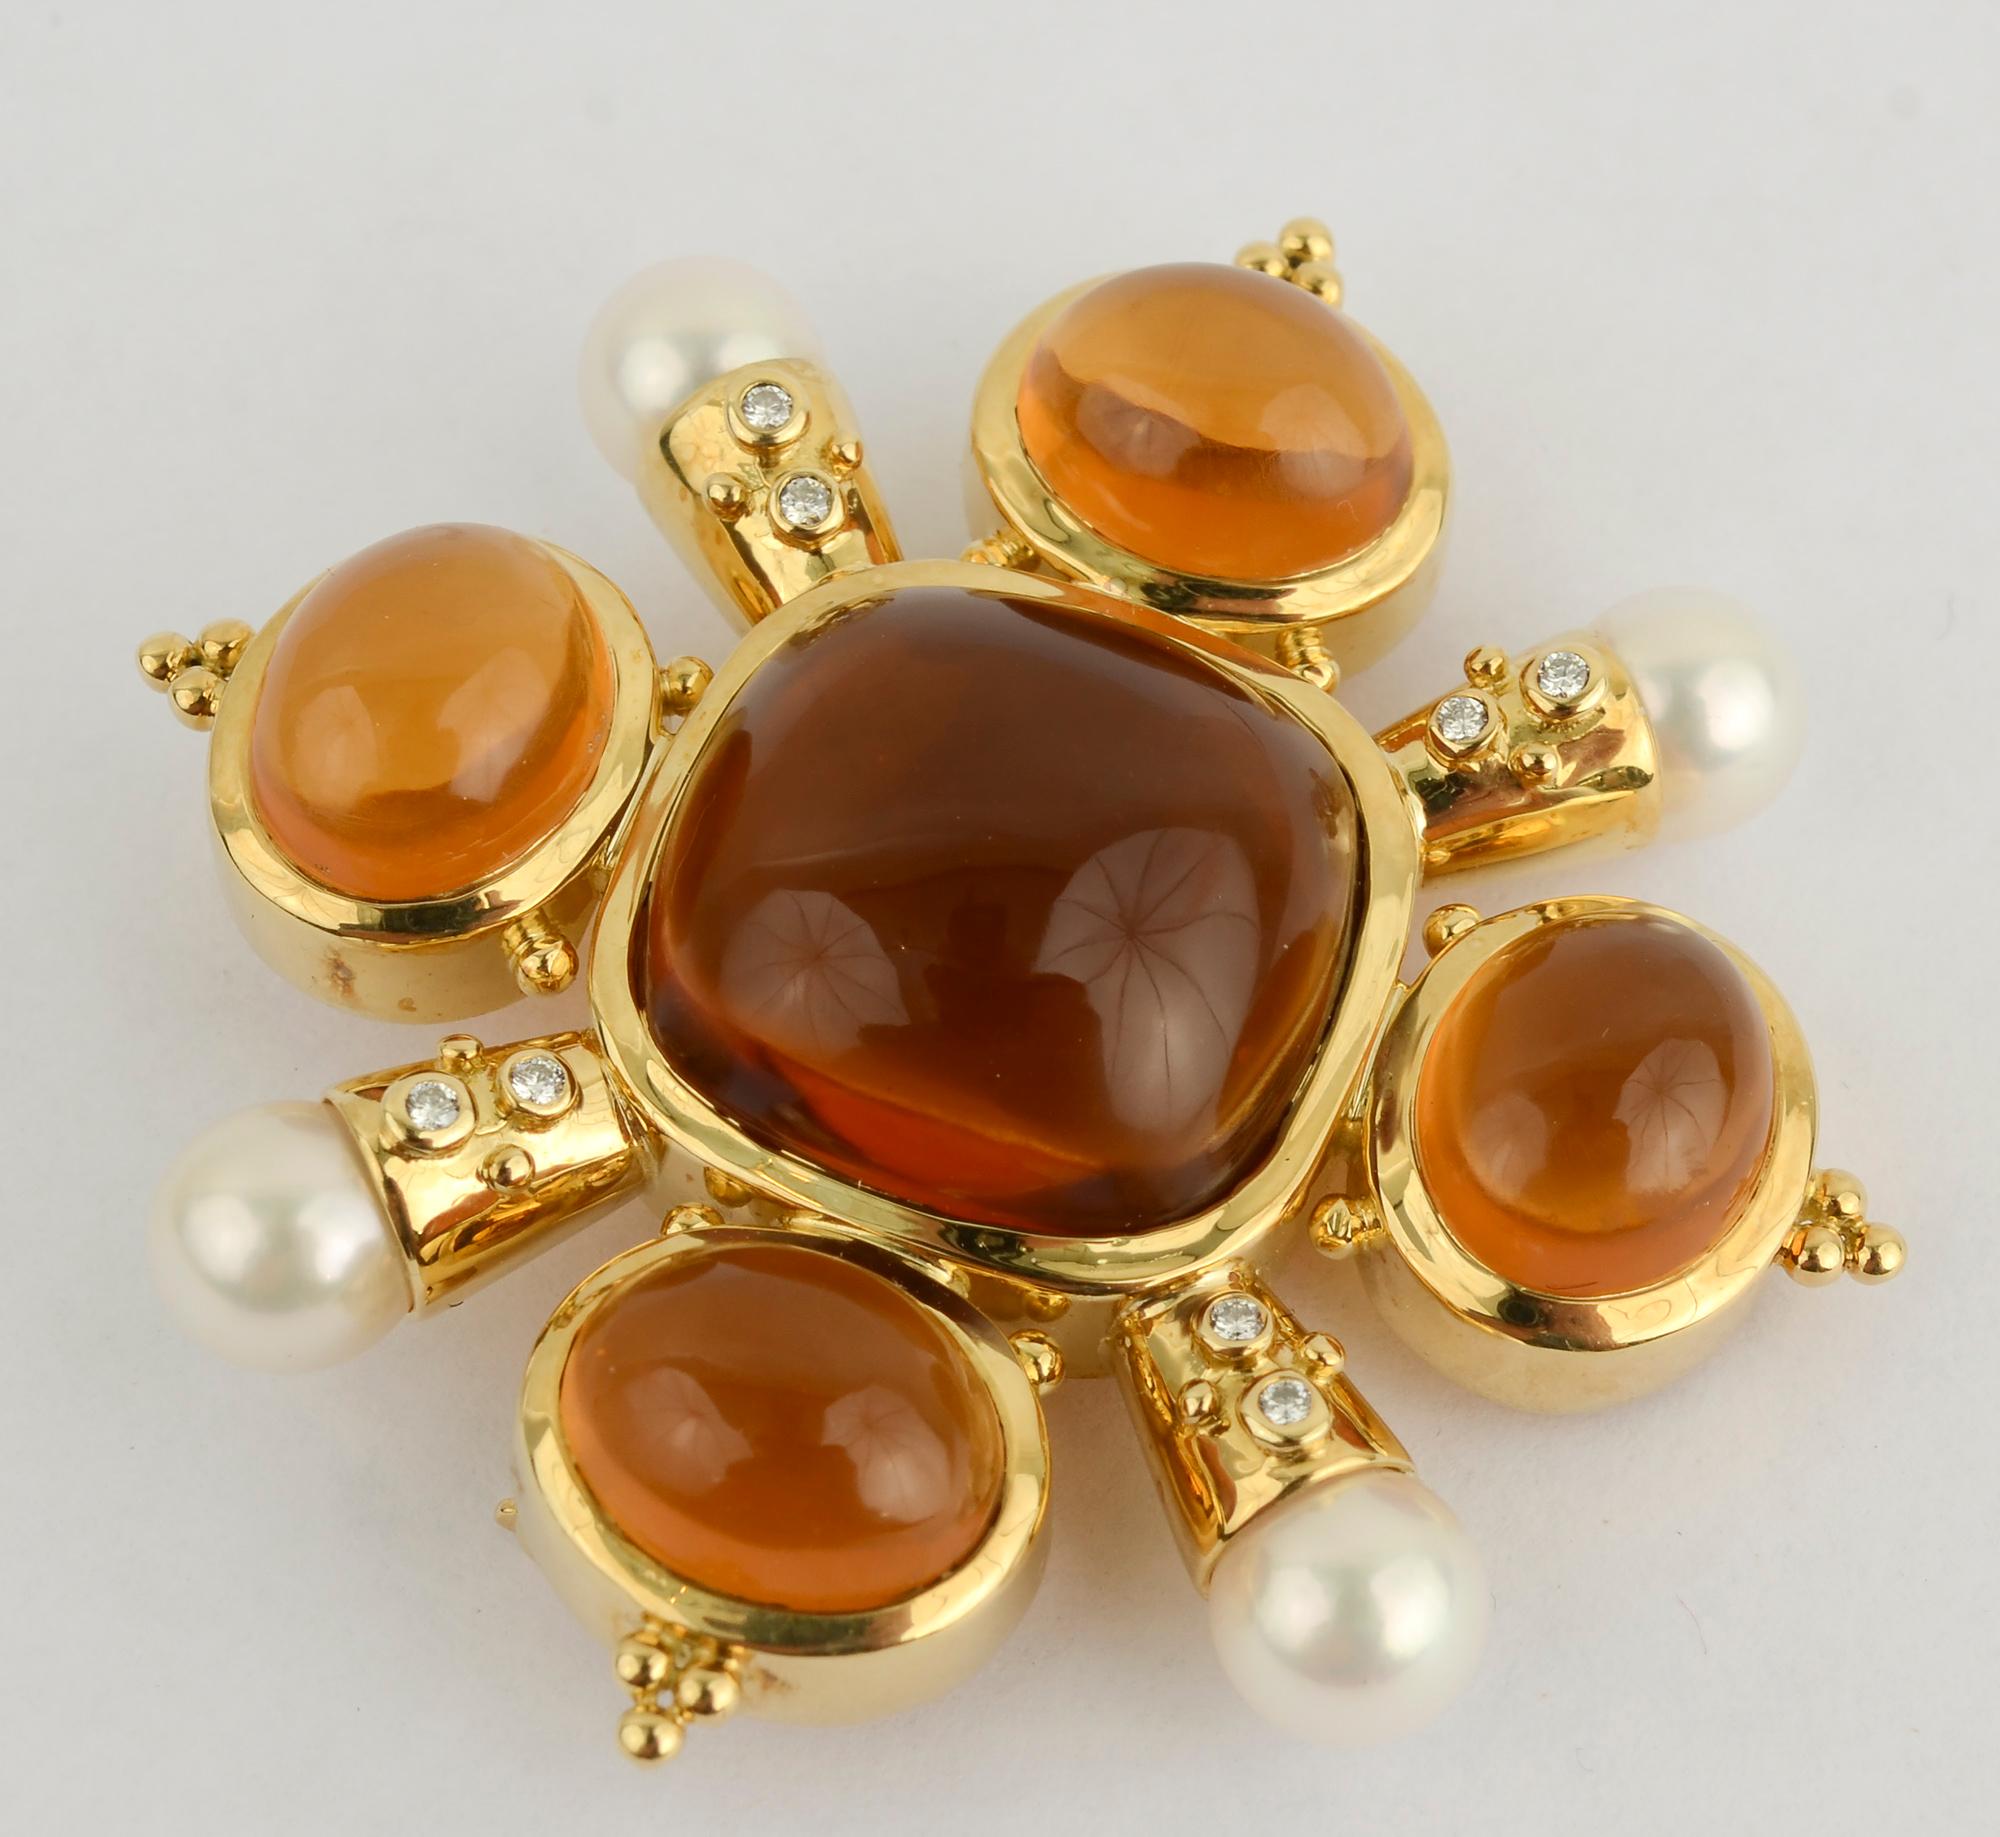 Striking brooch of warm, honey colored citrine; pearls and diamonds. Each of the arms supporting the pearls has two diamonds and two gold balls. The balls echo the tips of the oval citrines.
The brooch measures 2 1/16 inches in diameter and 1 7/8